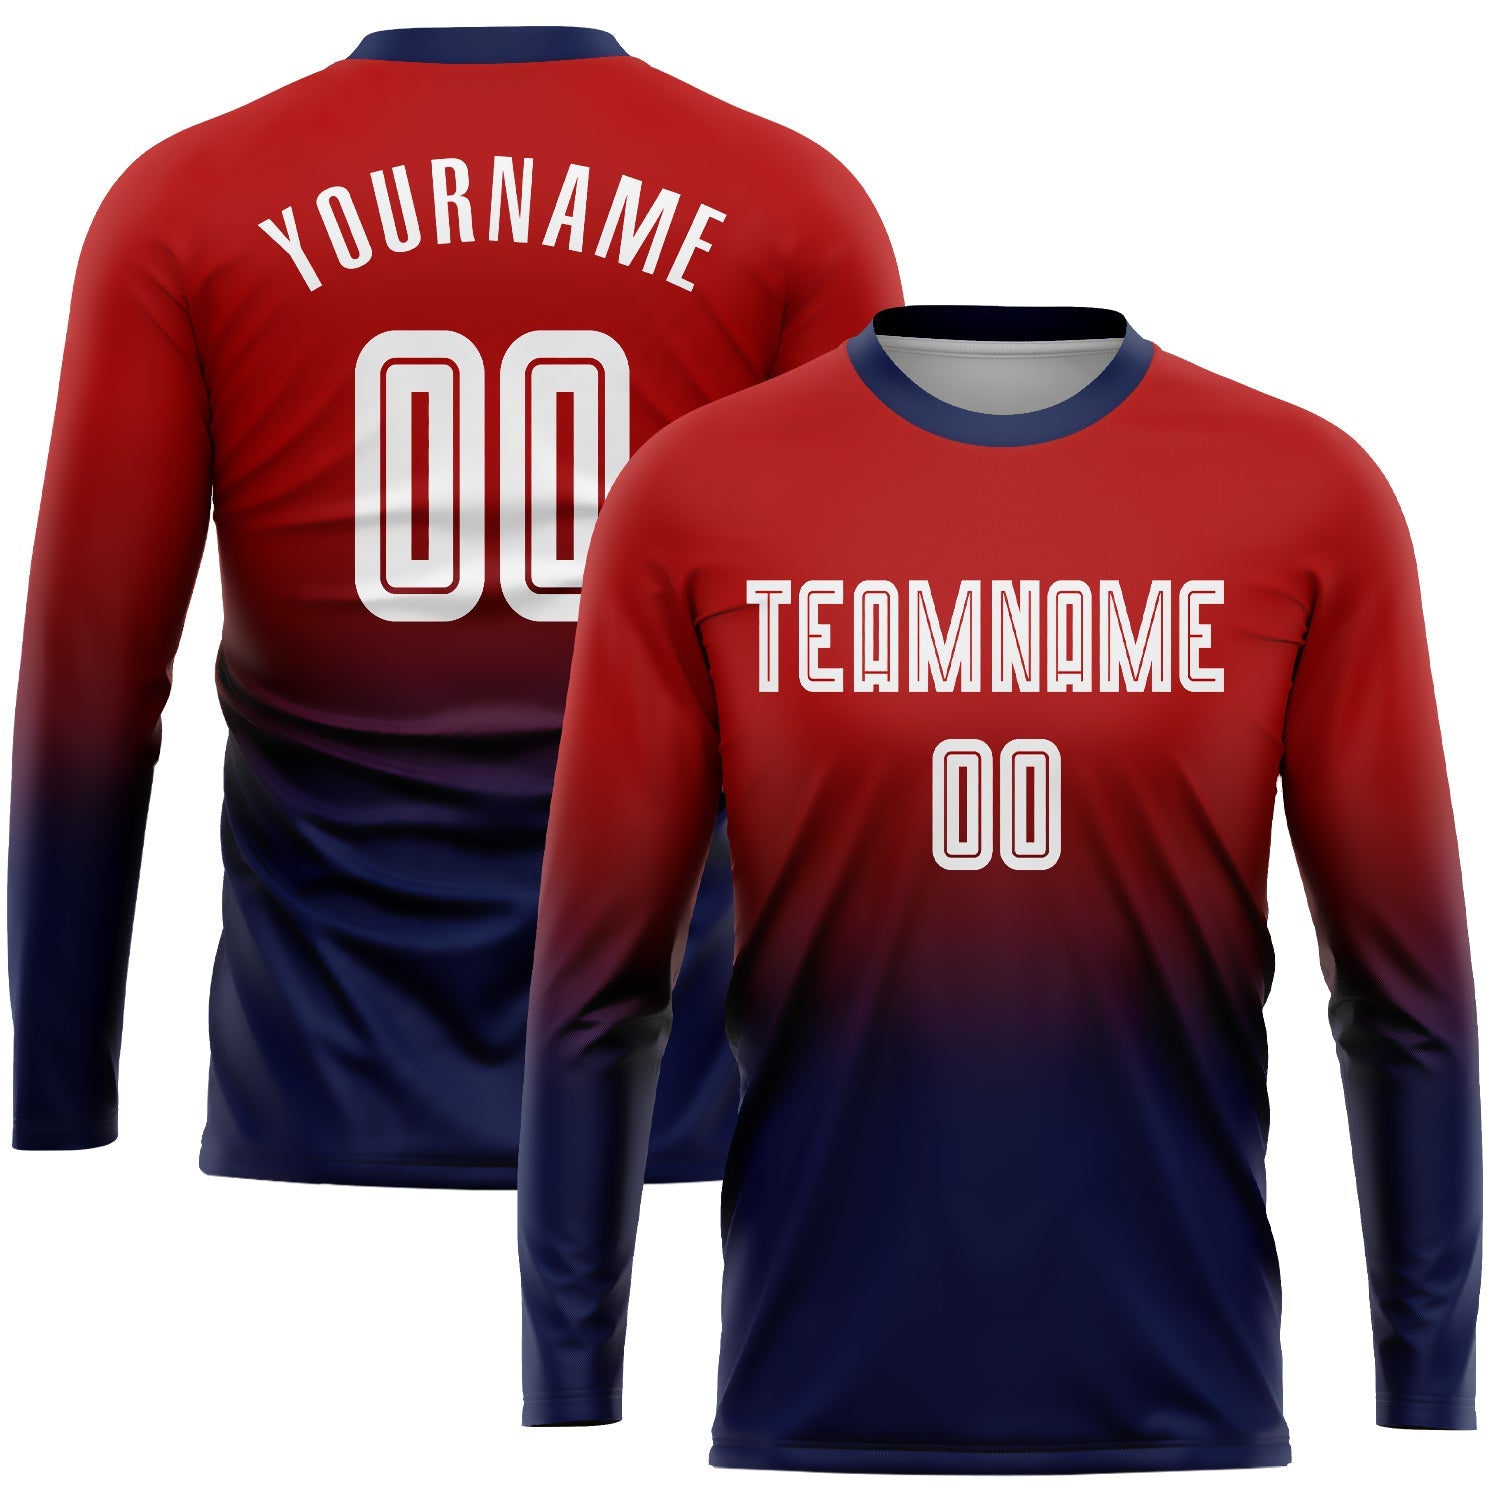 Custom Red White-Navy Sublimation Long Sleeve Fade Fashion Soccer Uniform Jersey